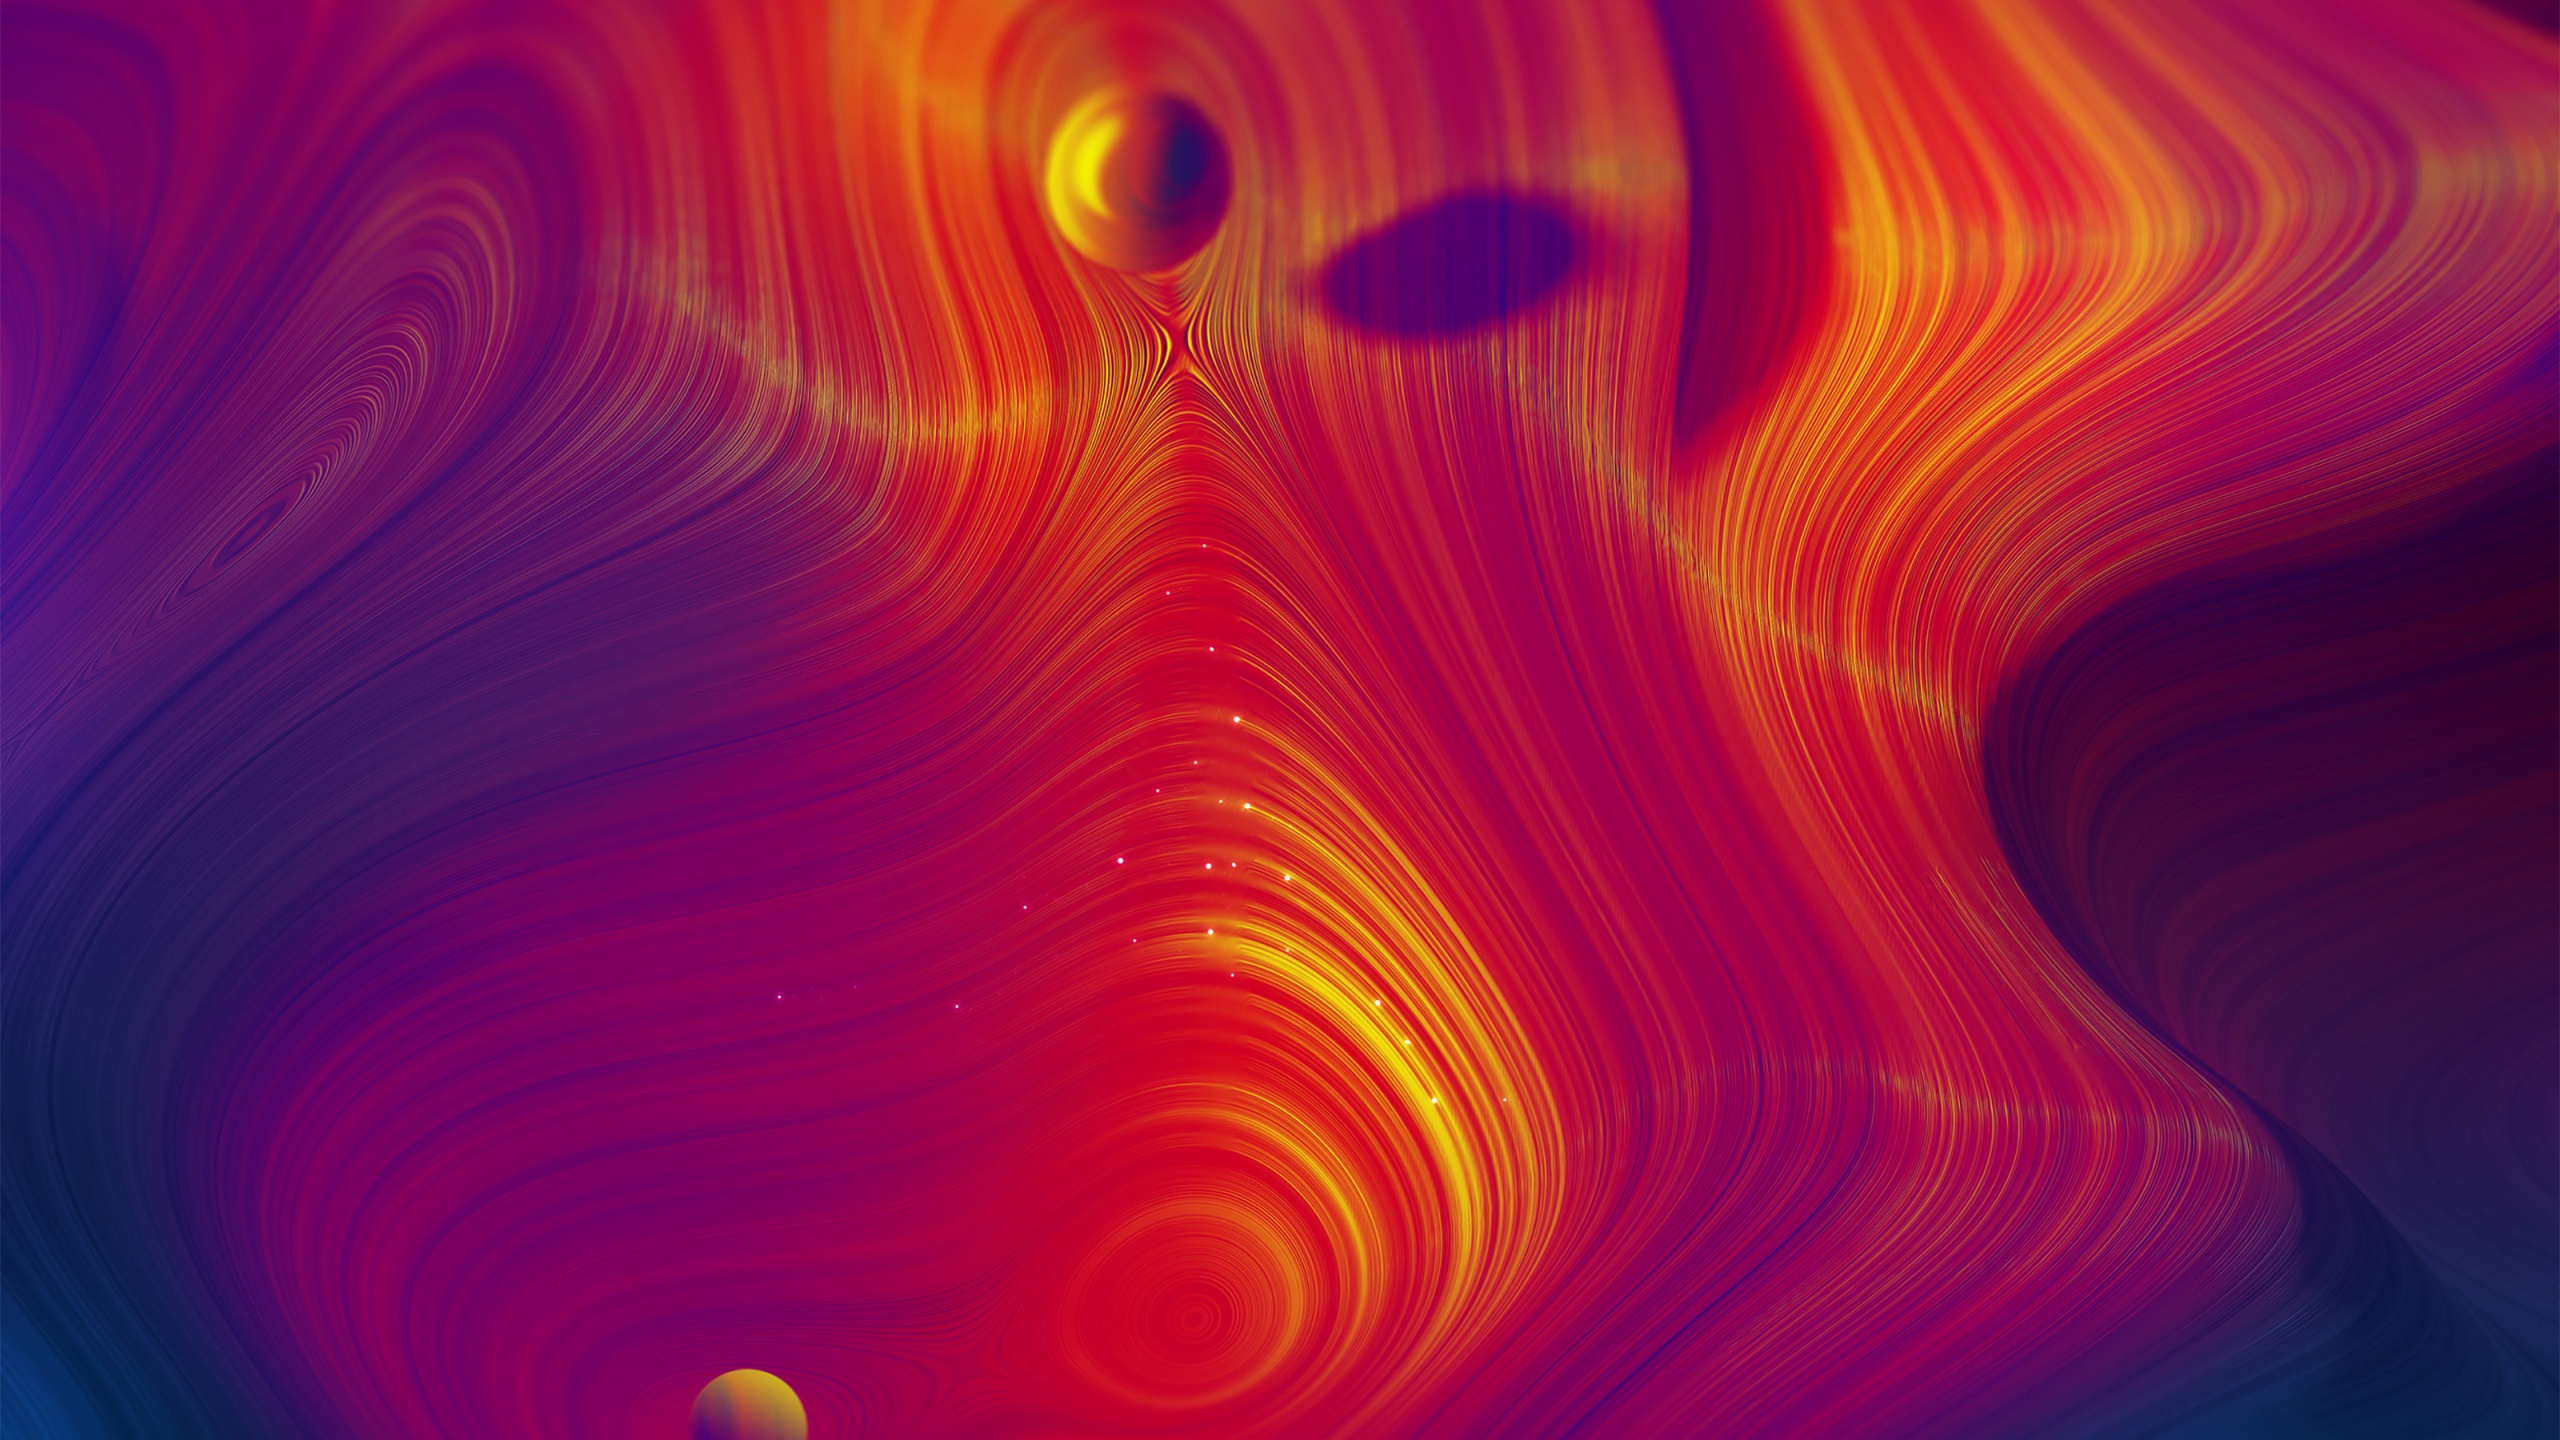 Abstract Wavy 3D 2560x1440